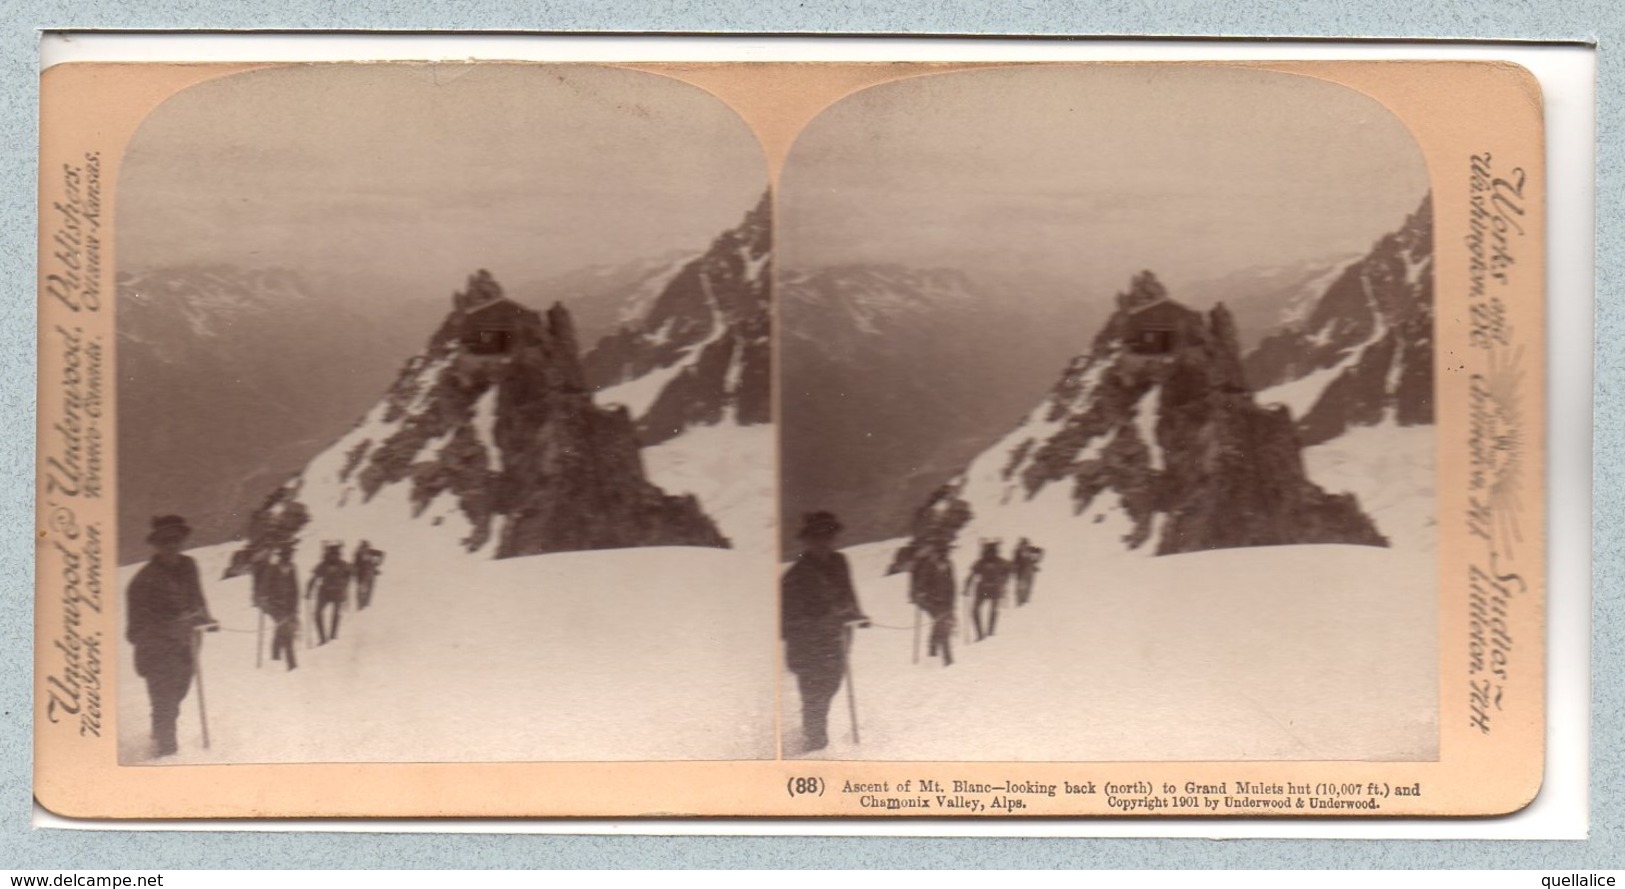 0710 "88 ASCENT OF MT. BLANC LOOKING BACK TO GRAND MULETS HUT AND CHAMONIX VALLEY , ALPS - 1901" ANIMATA. STEREOSC. ORIG - Cartes Stéréoscopiques